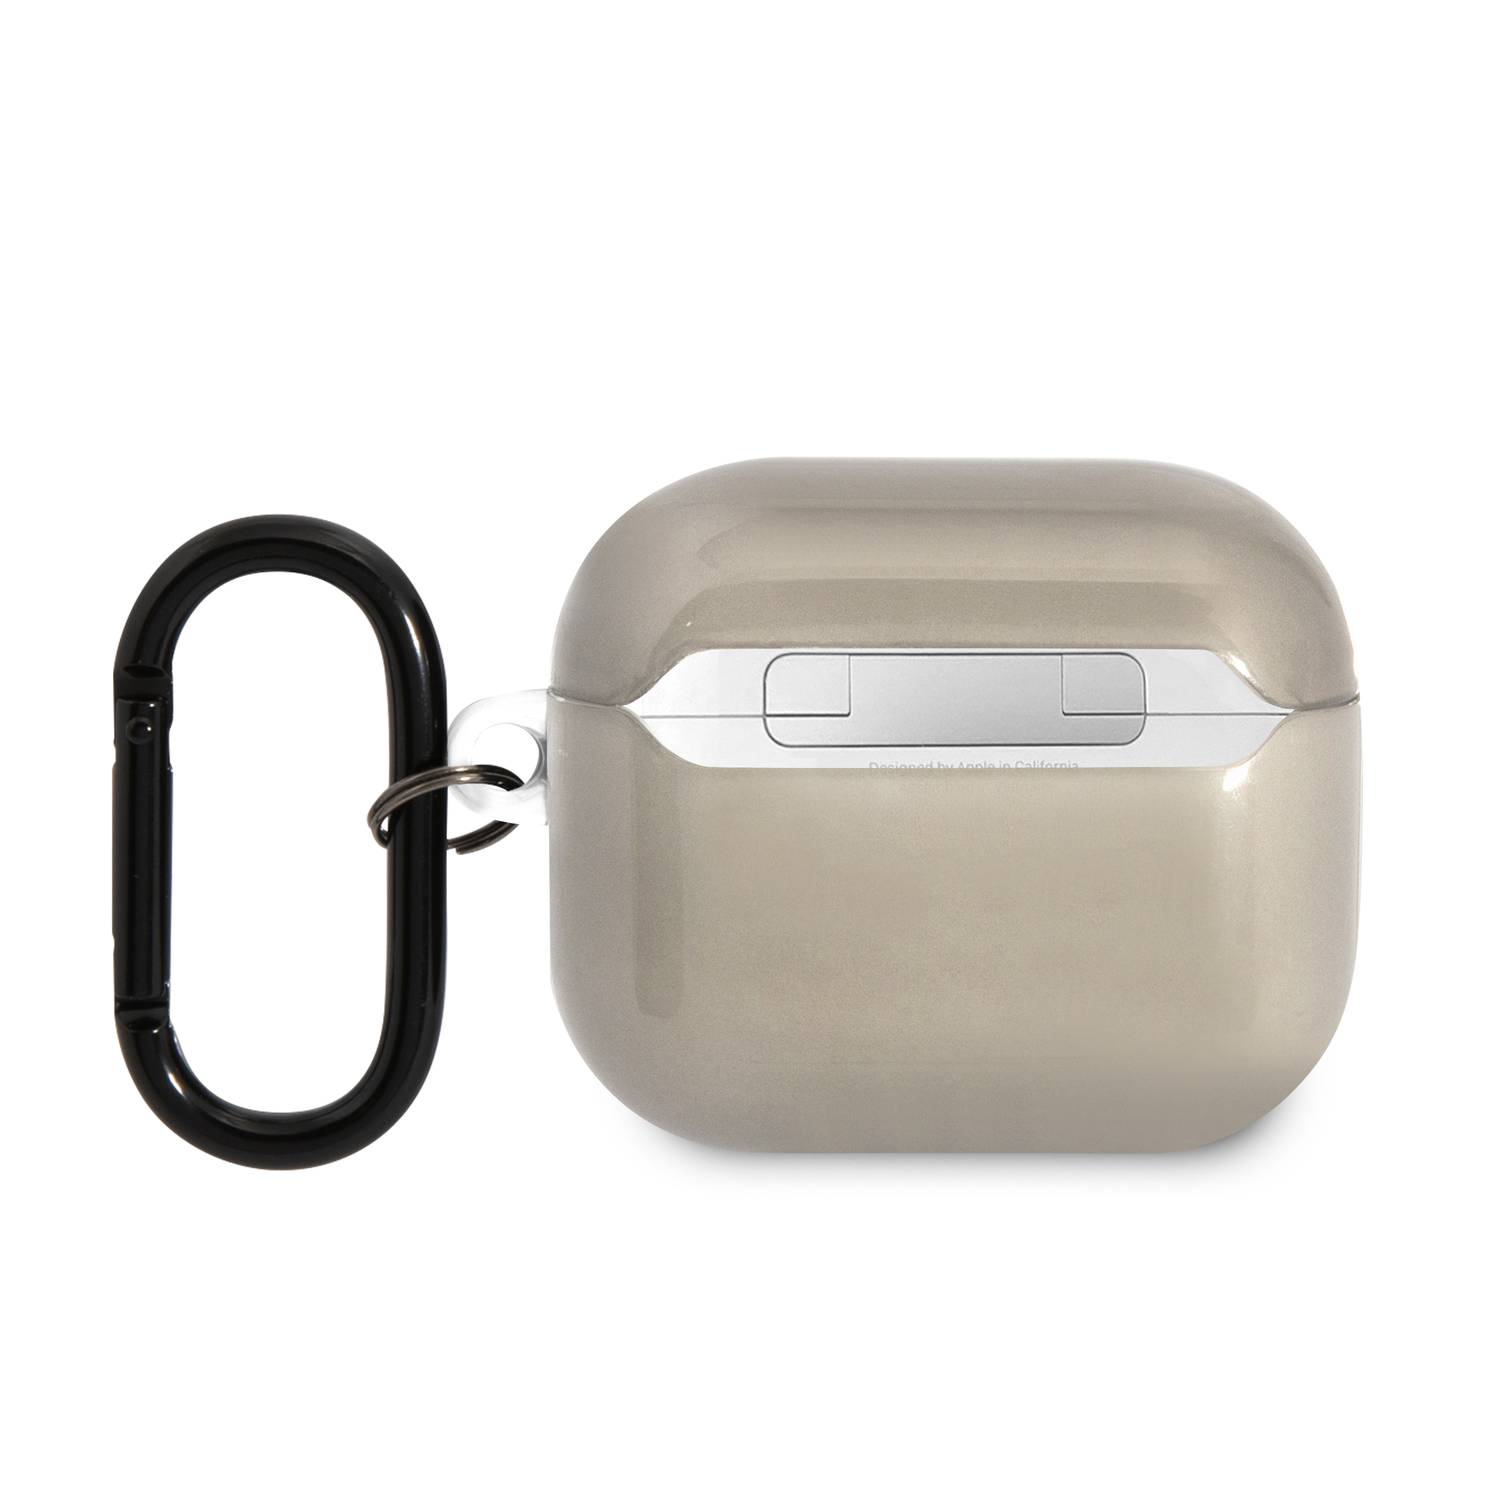 Buy Amazing Thing Smoothie AirPods Pro 2 Case Black Online in UAE